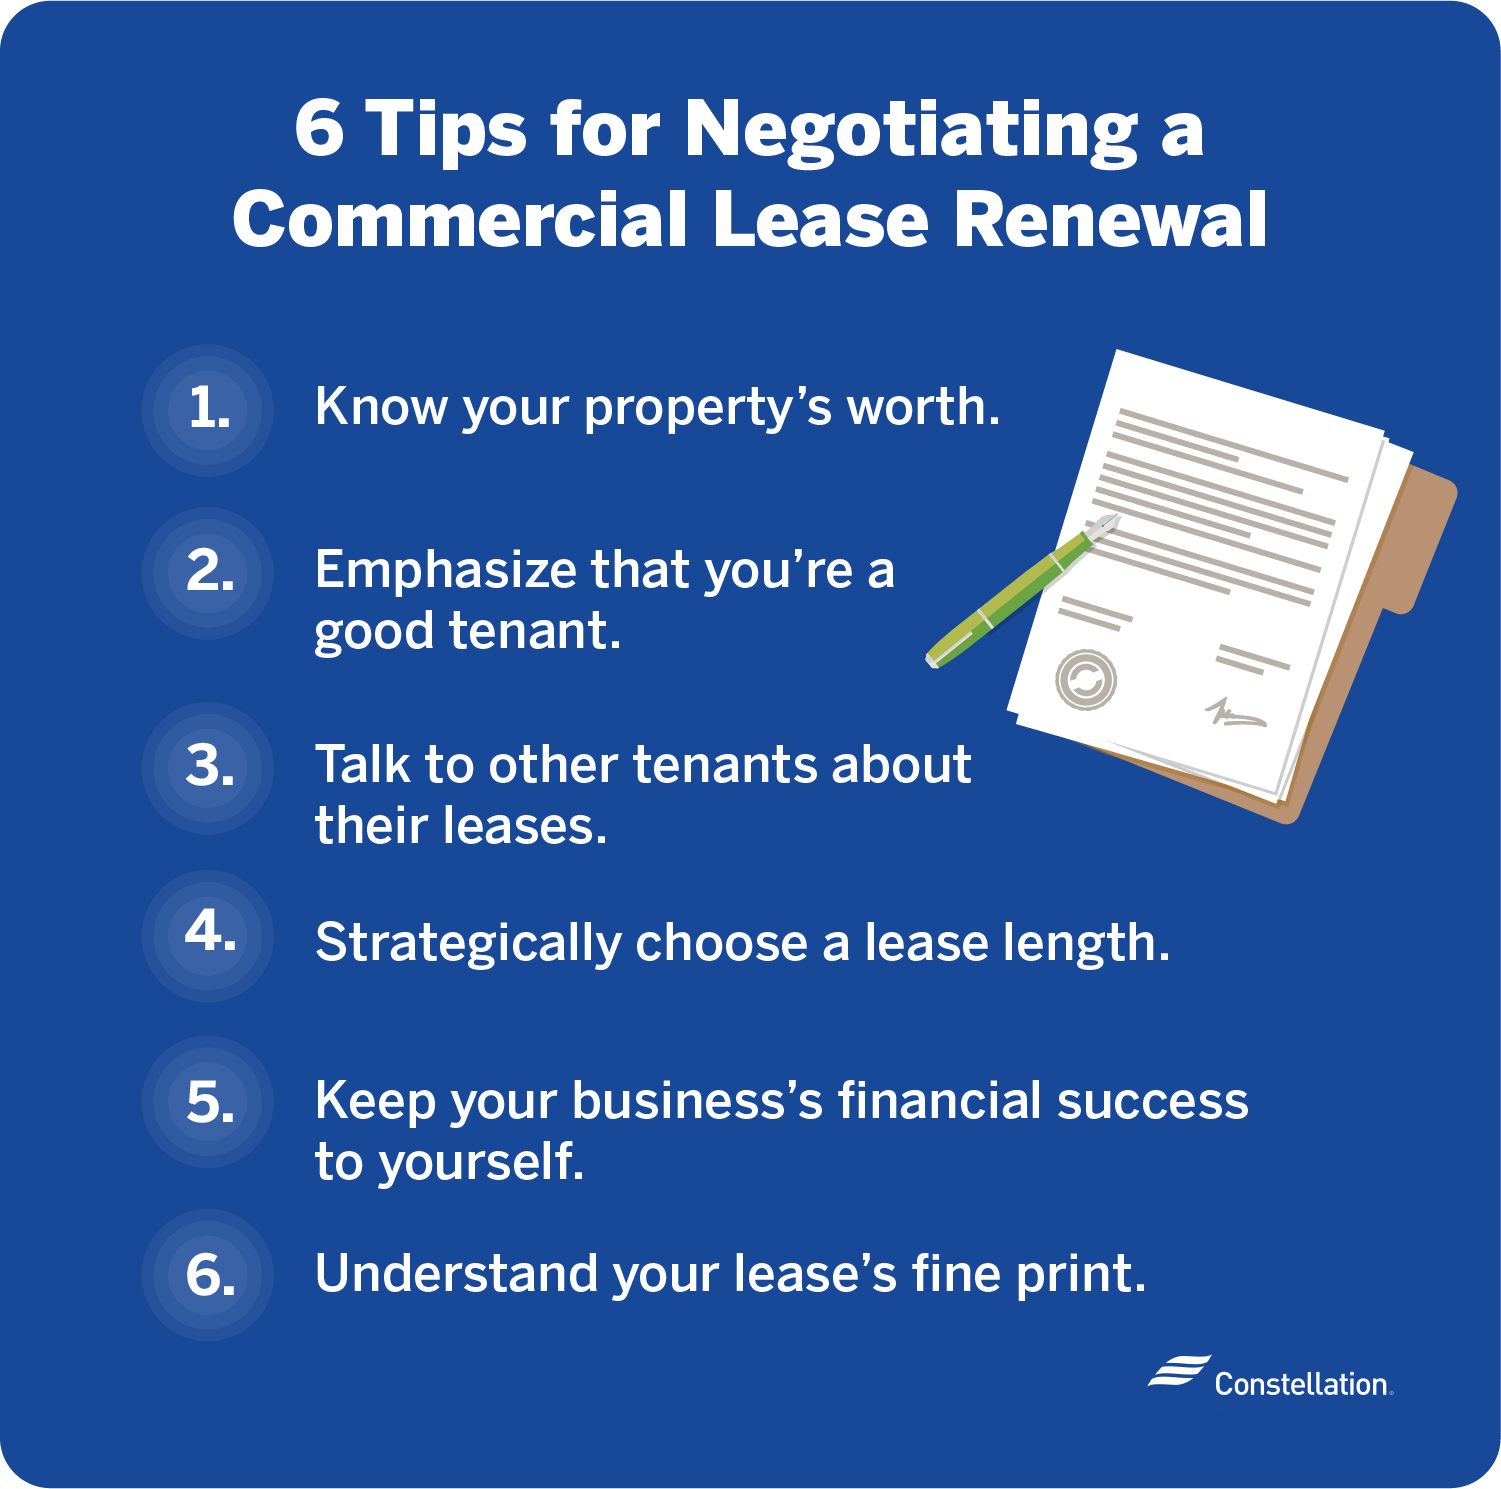 6 tips for how to negotiate a commercial lease renewal